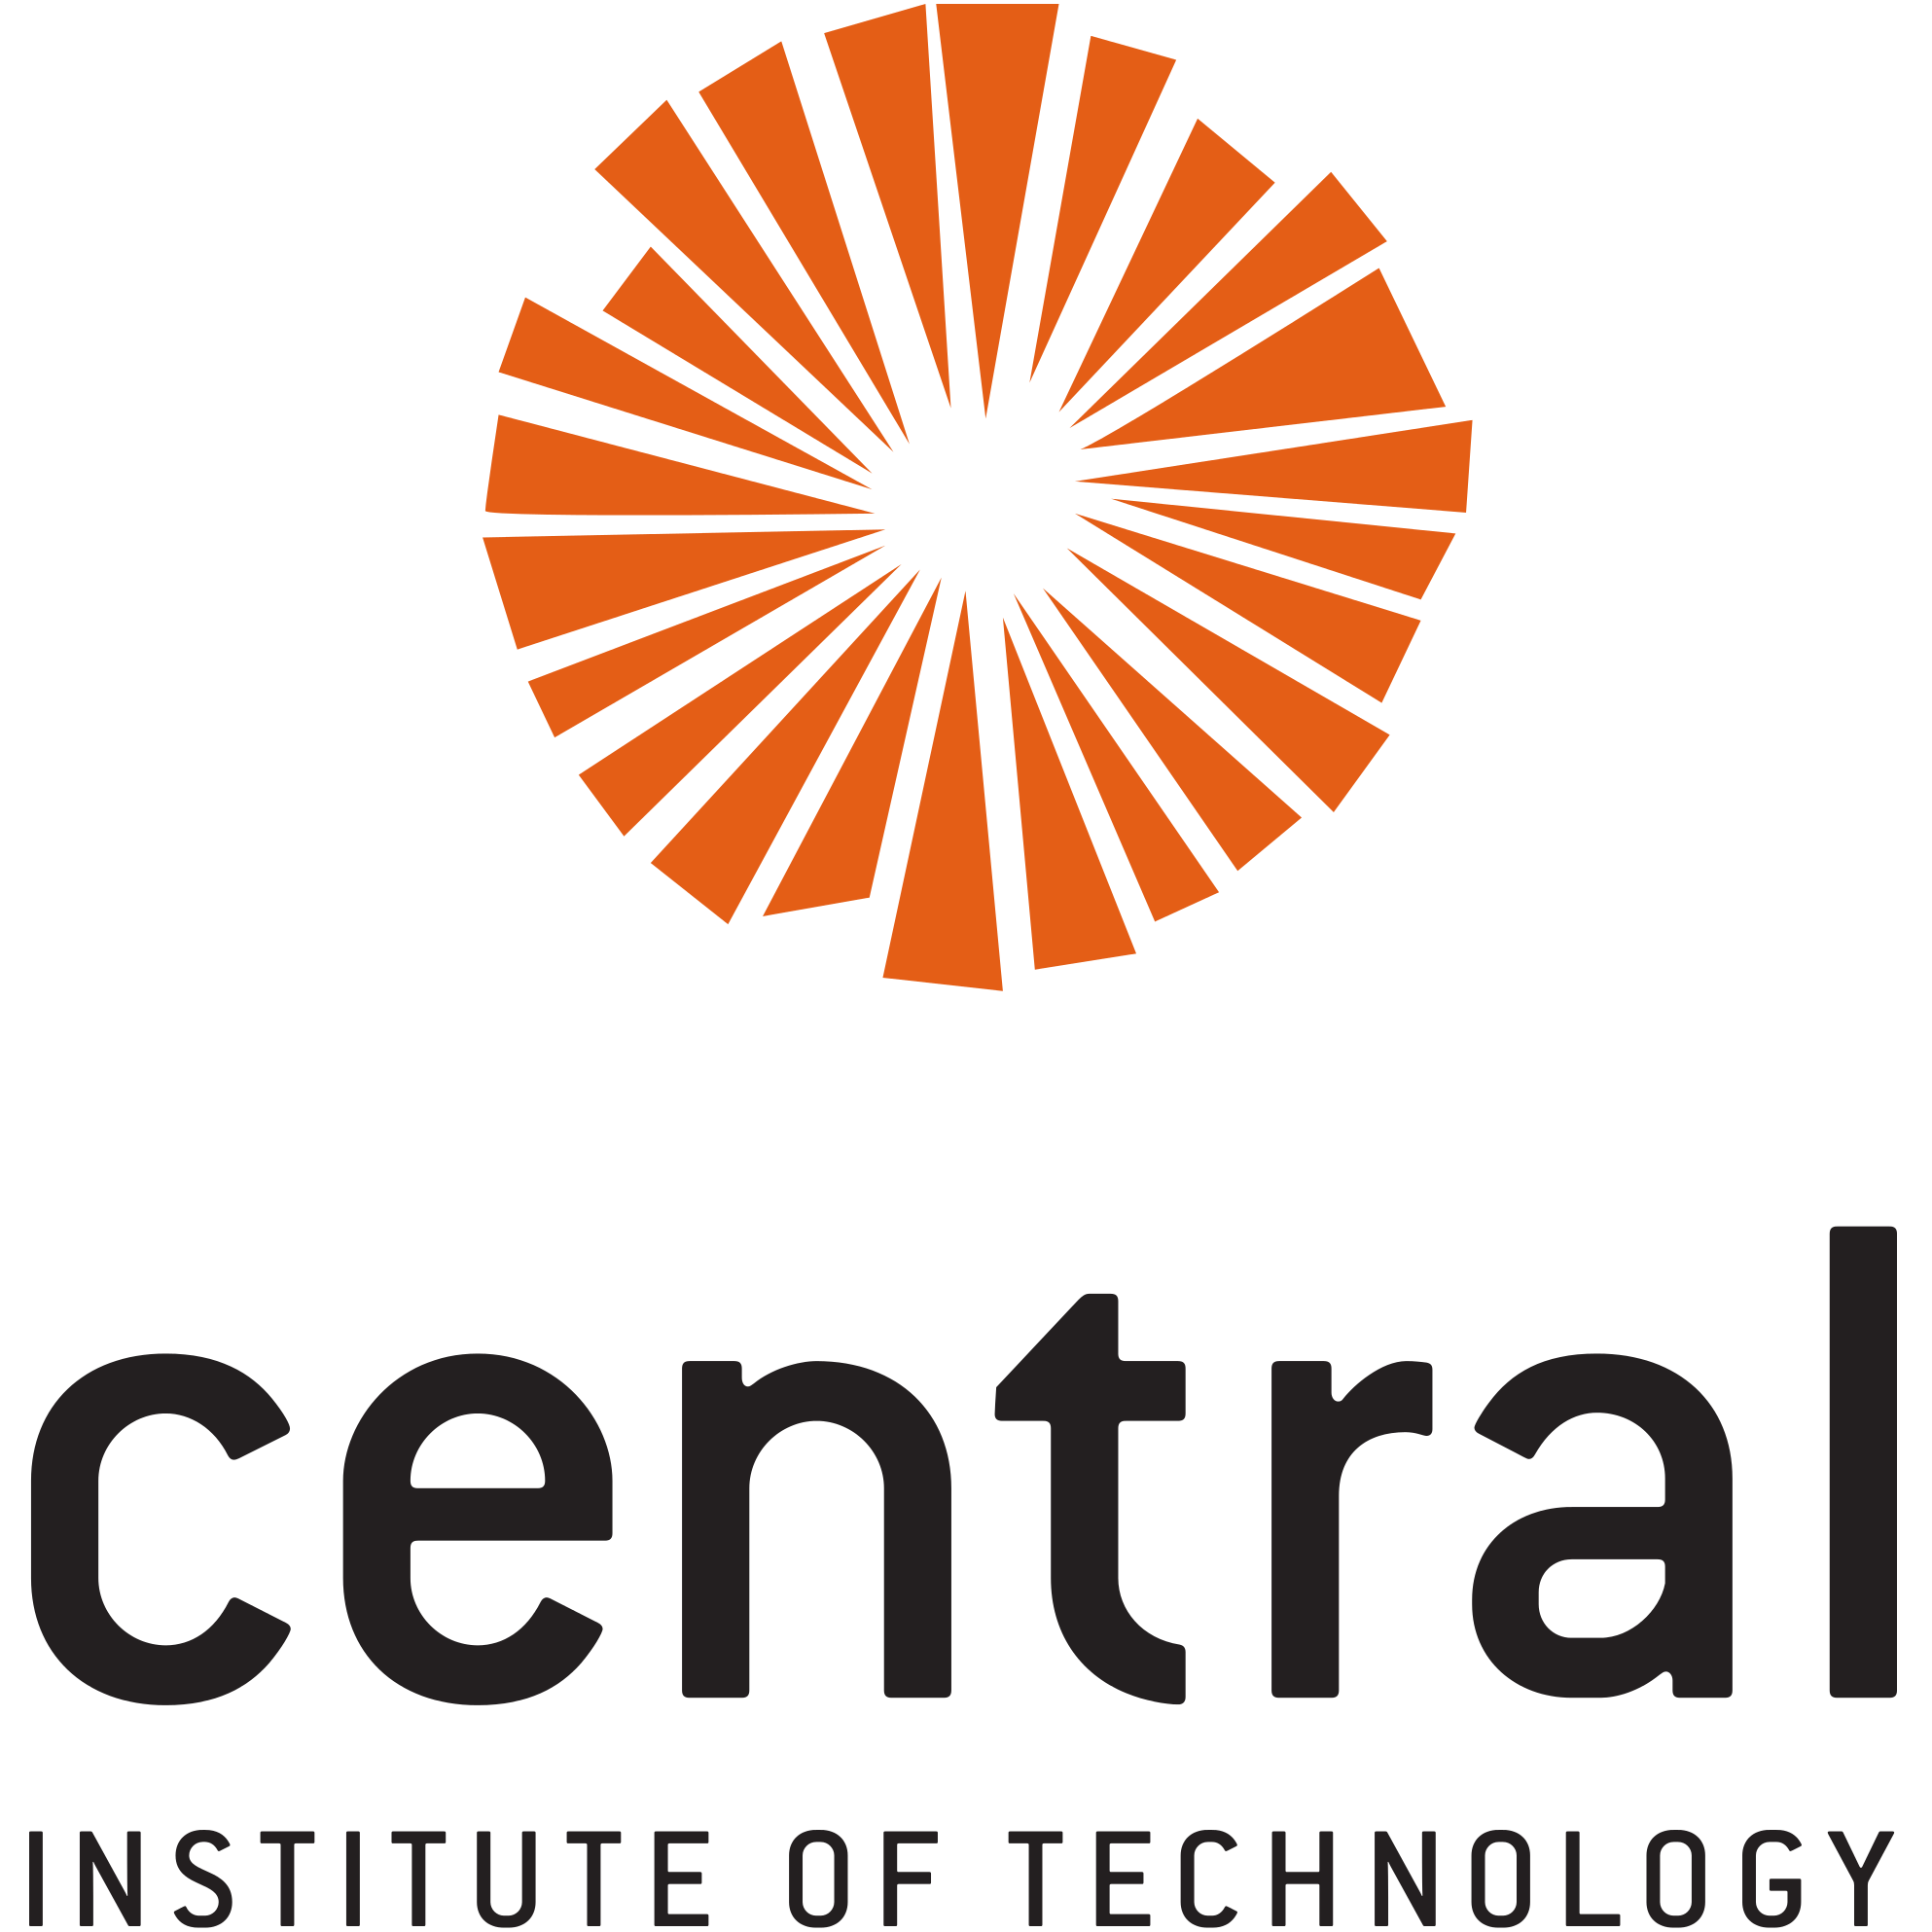 Central_Institute_of_Technology_logo.svg.png